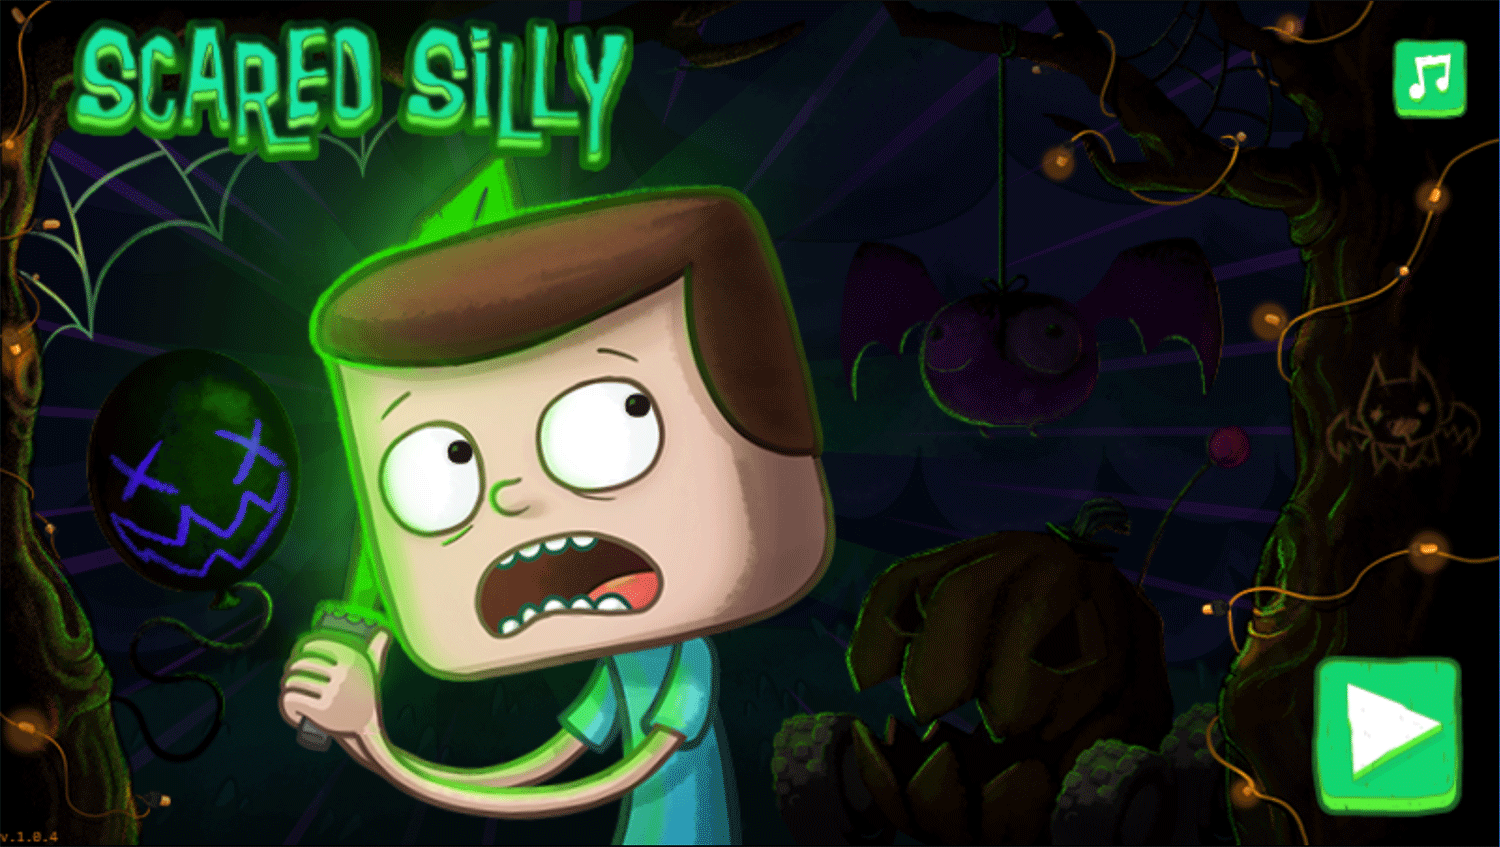 Clarence Scared Silly Game Welcome Screen Screenshot.